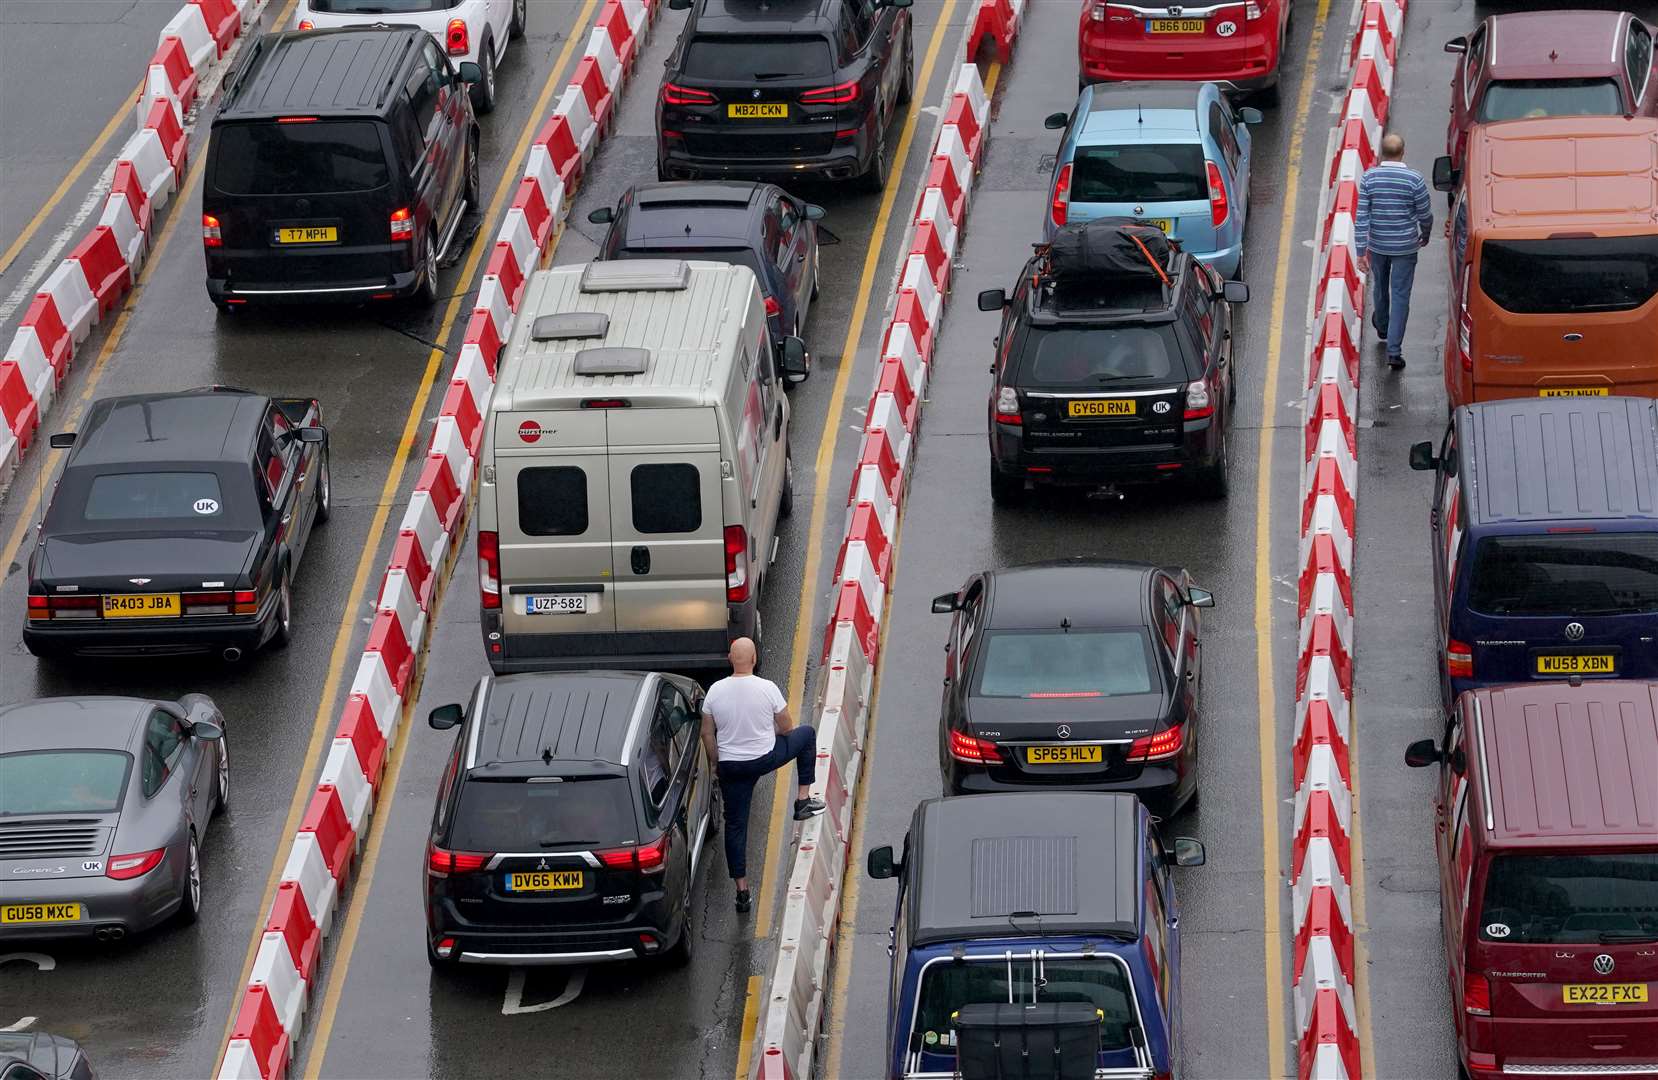 Expected car arrivals for Wednesday morning were estimated at a peak of more than 2,000 (Gareth Fuller/PA)